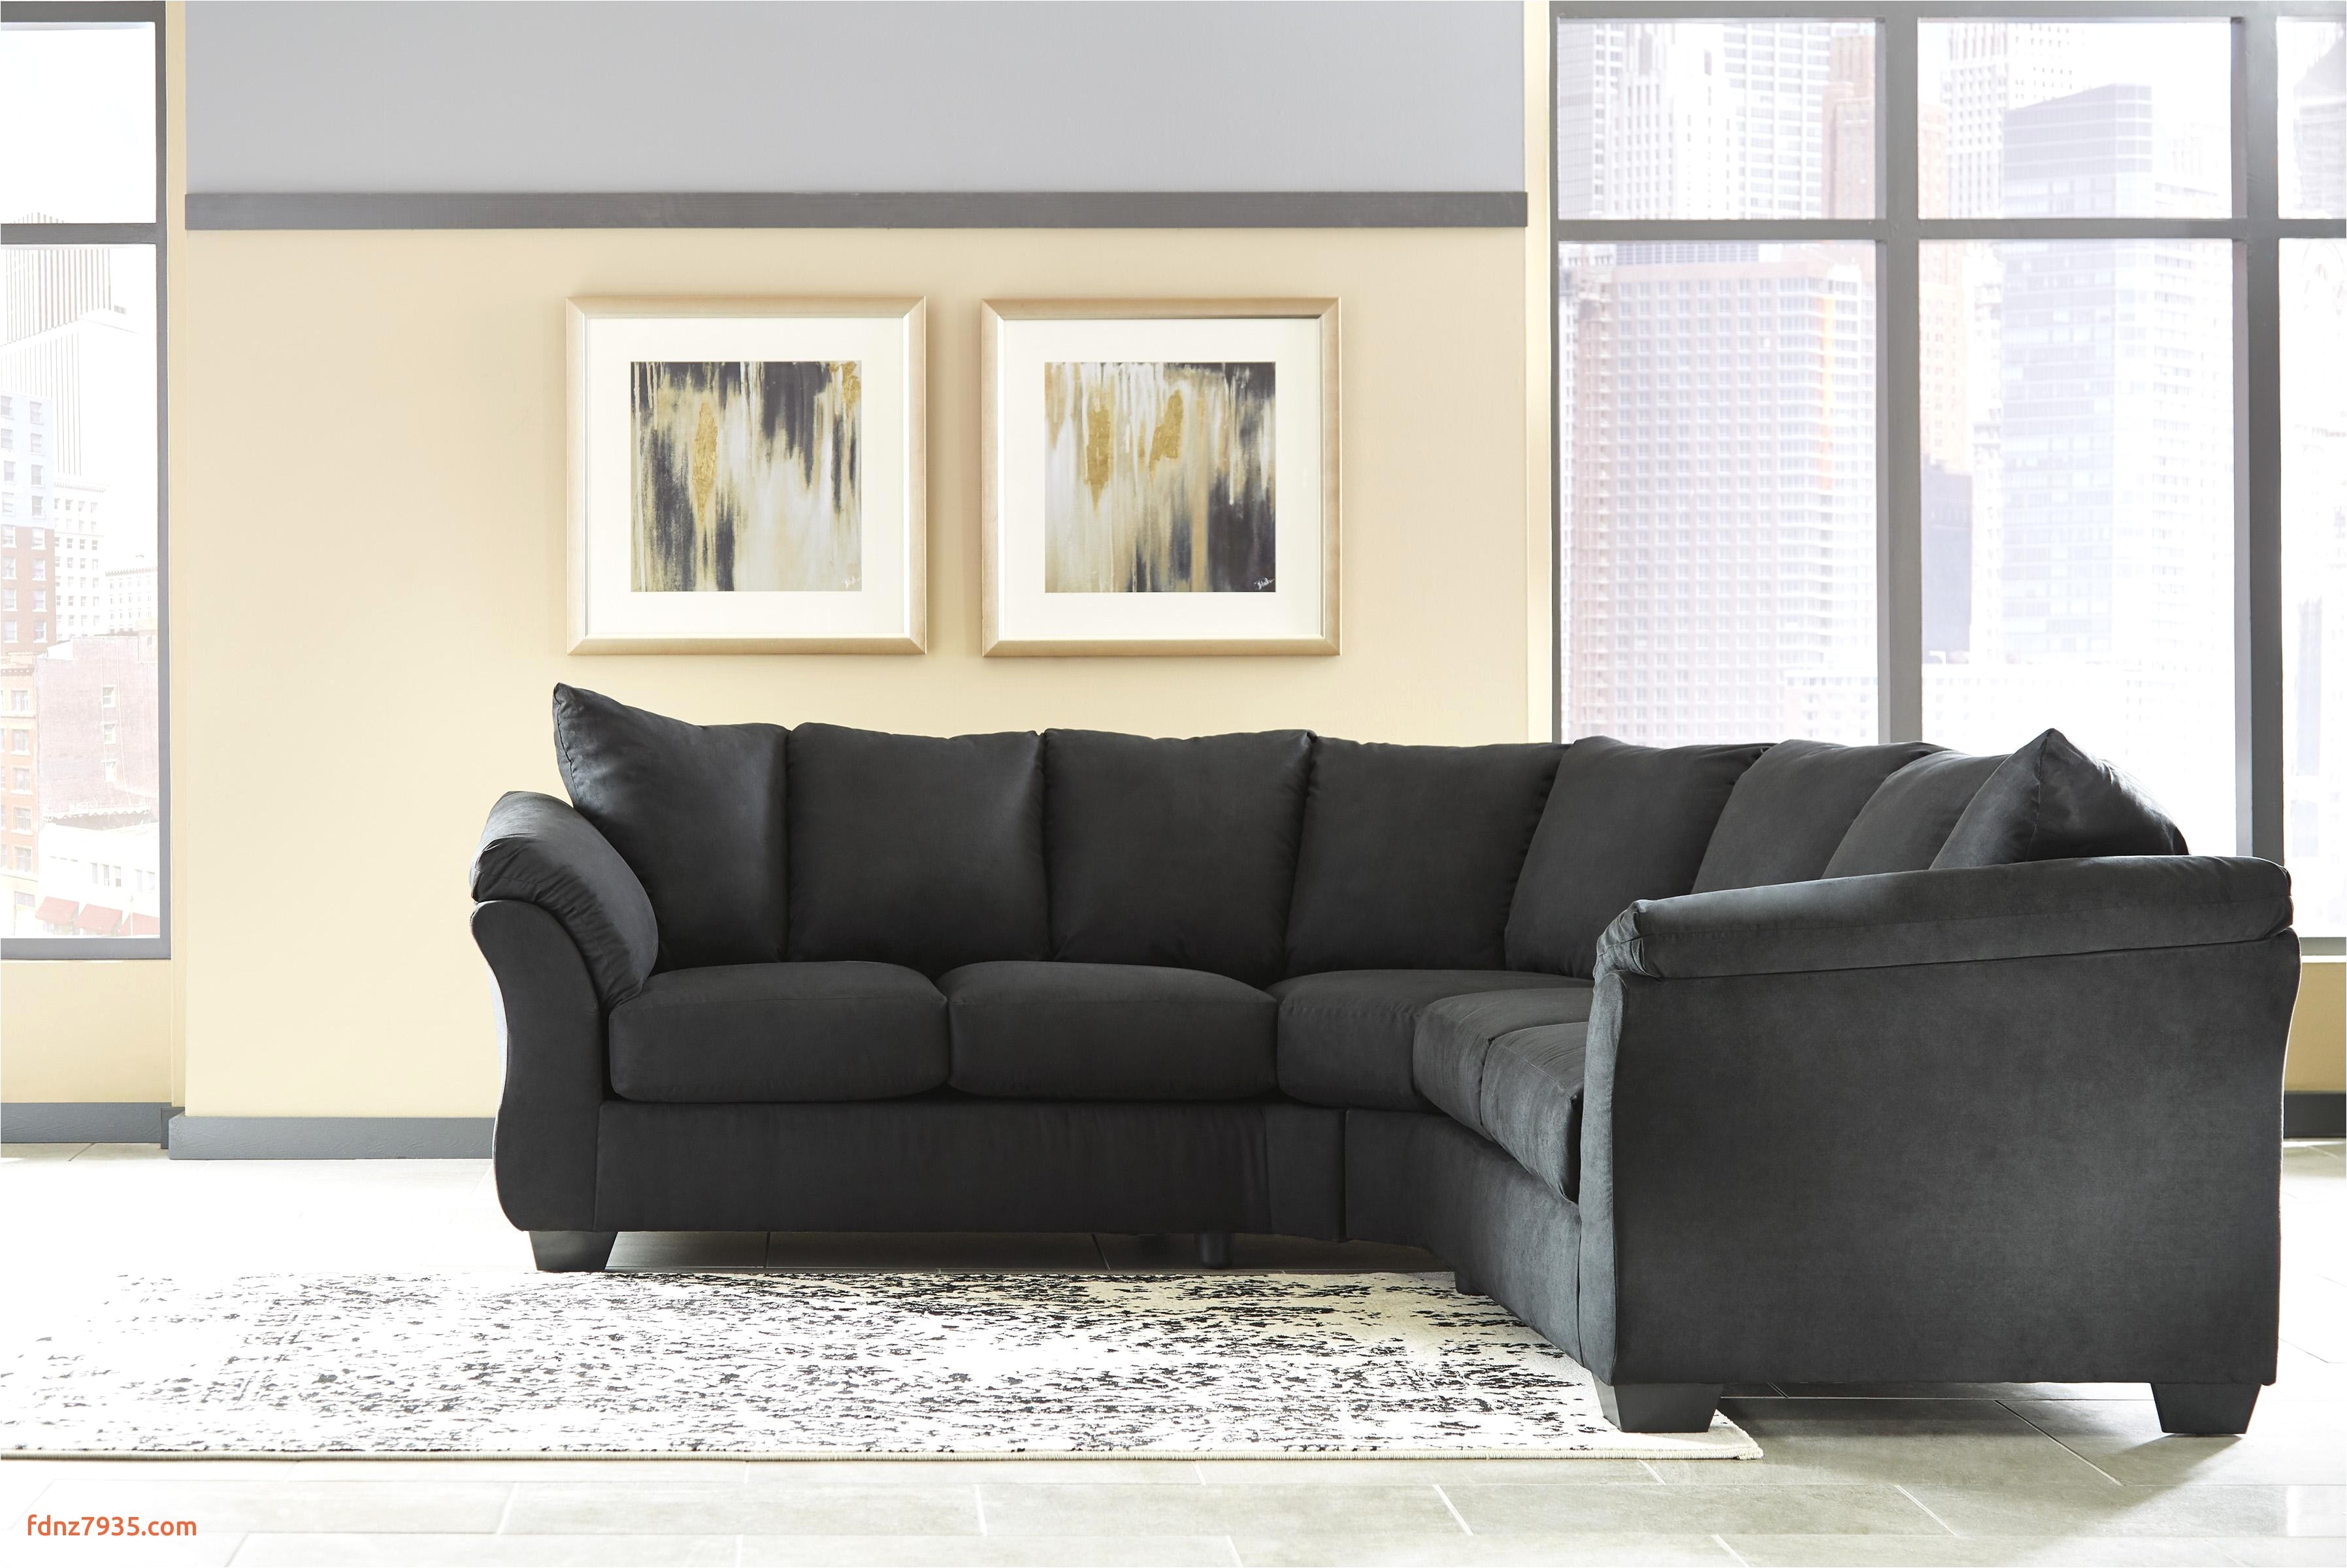 living room couches luxury living room ideas with sectional sofas luxury sectional couch 0d